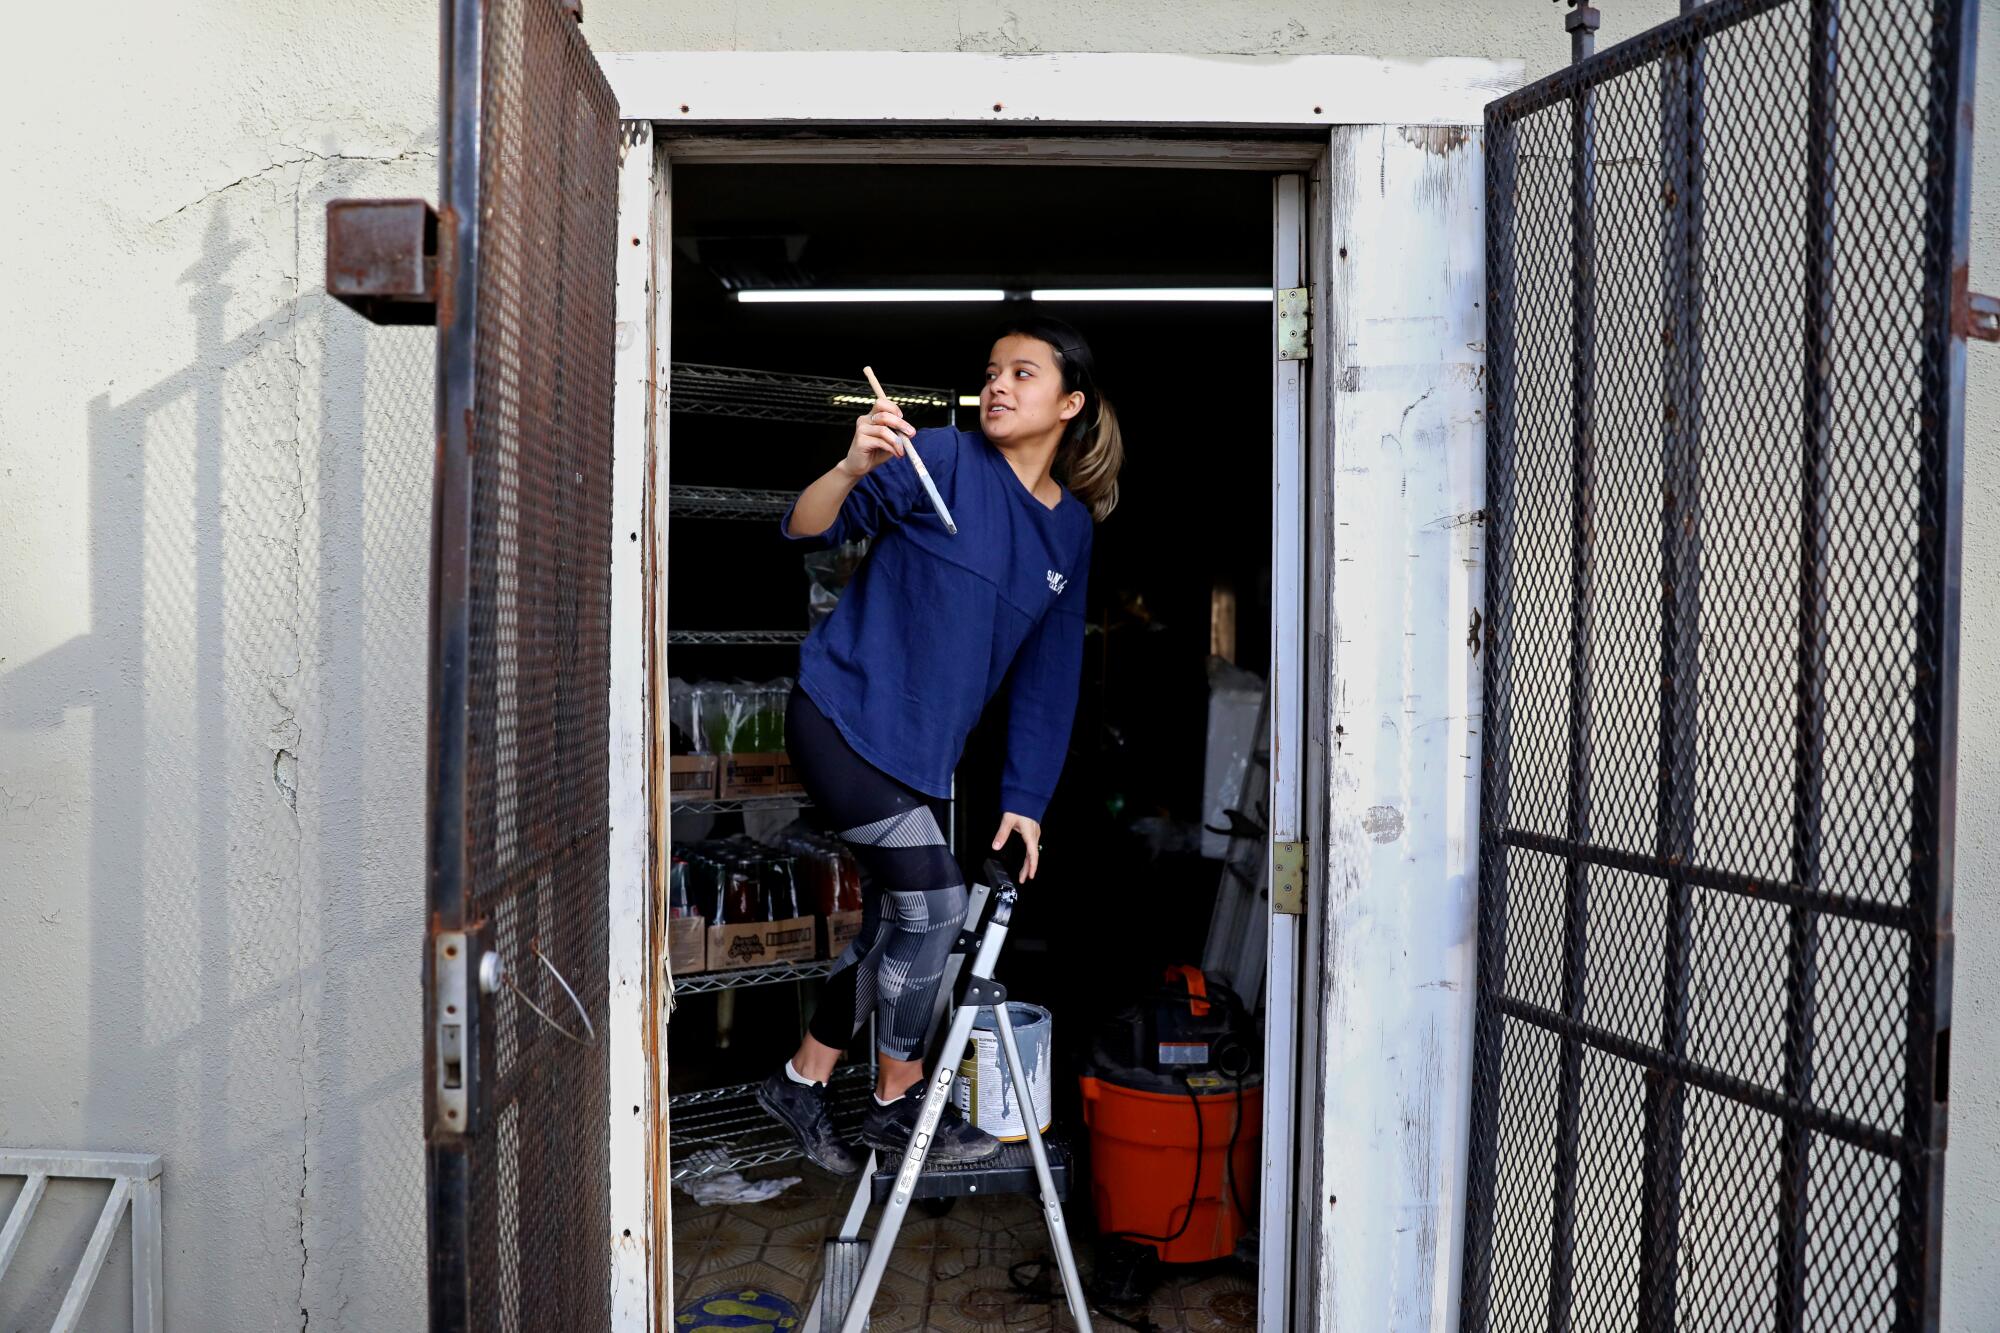 Hailey Cisneros helps her grandparents paint the walls of their flood-damaged El Gallito Bakery in Planada, Calif.